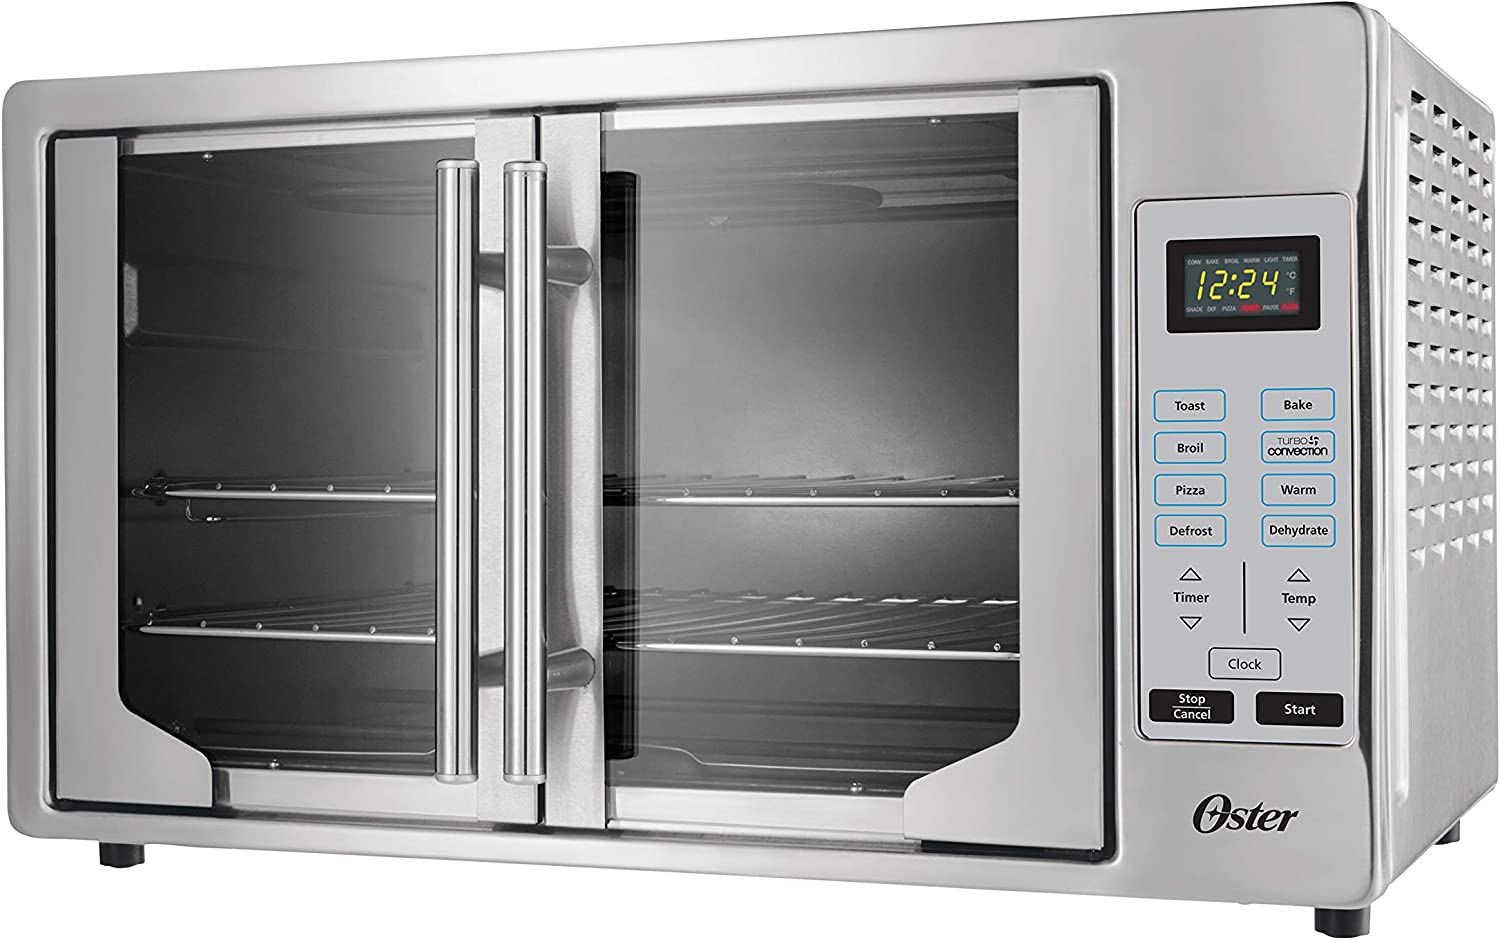 Oster Convection Oven, 8-in-1 Countertop Toaster Oven, [...]